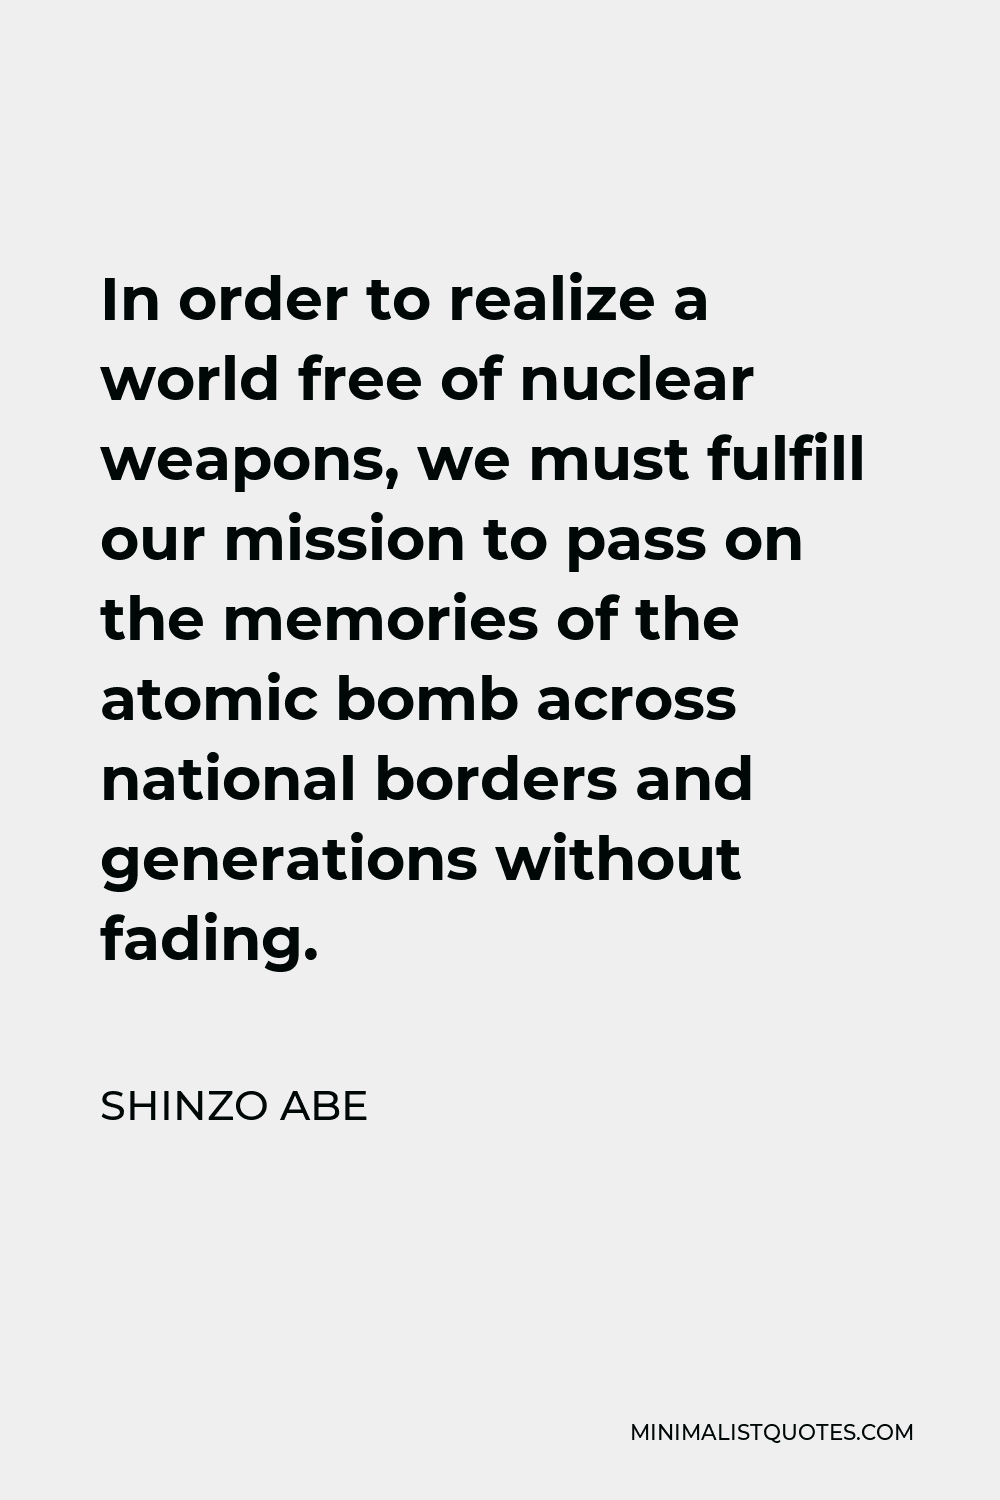 Shinzo Abe Quote - In order to realize a world free of nuclear weapons, we must fulfill our mission to pass on the memories of the atomic bomb across national borders and generations without fading.